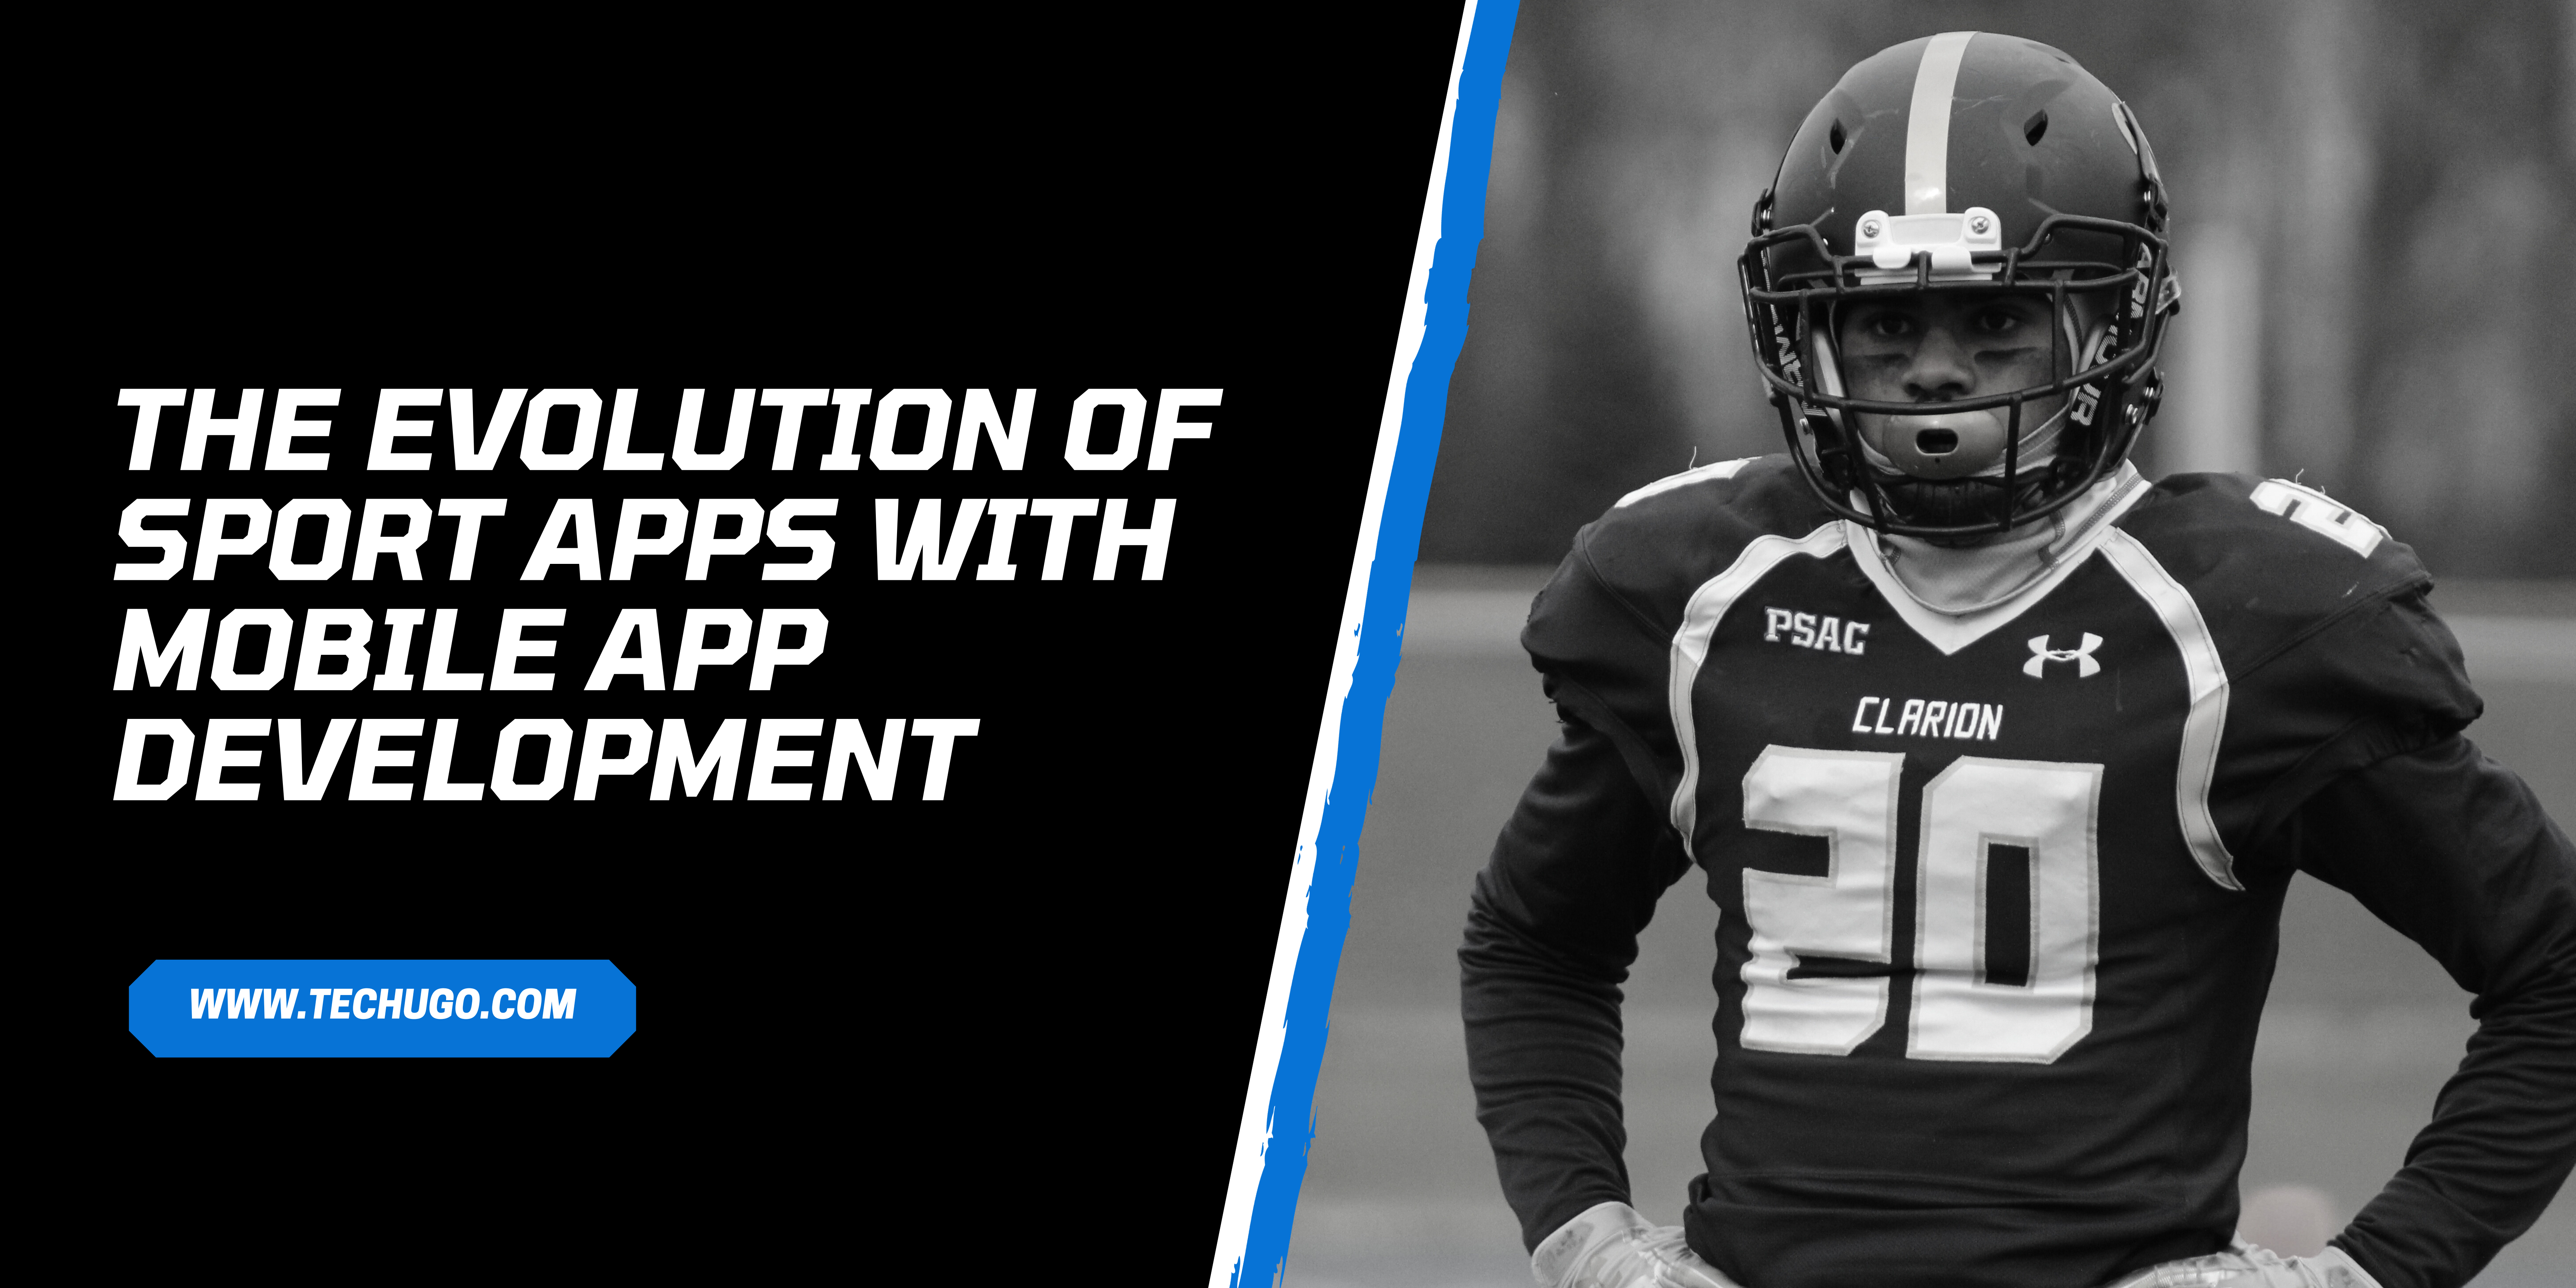 The Evolution of Sport Apps With Mobile App Development